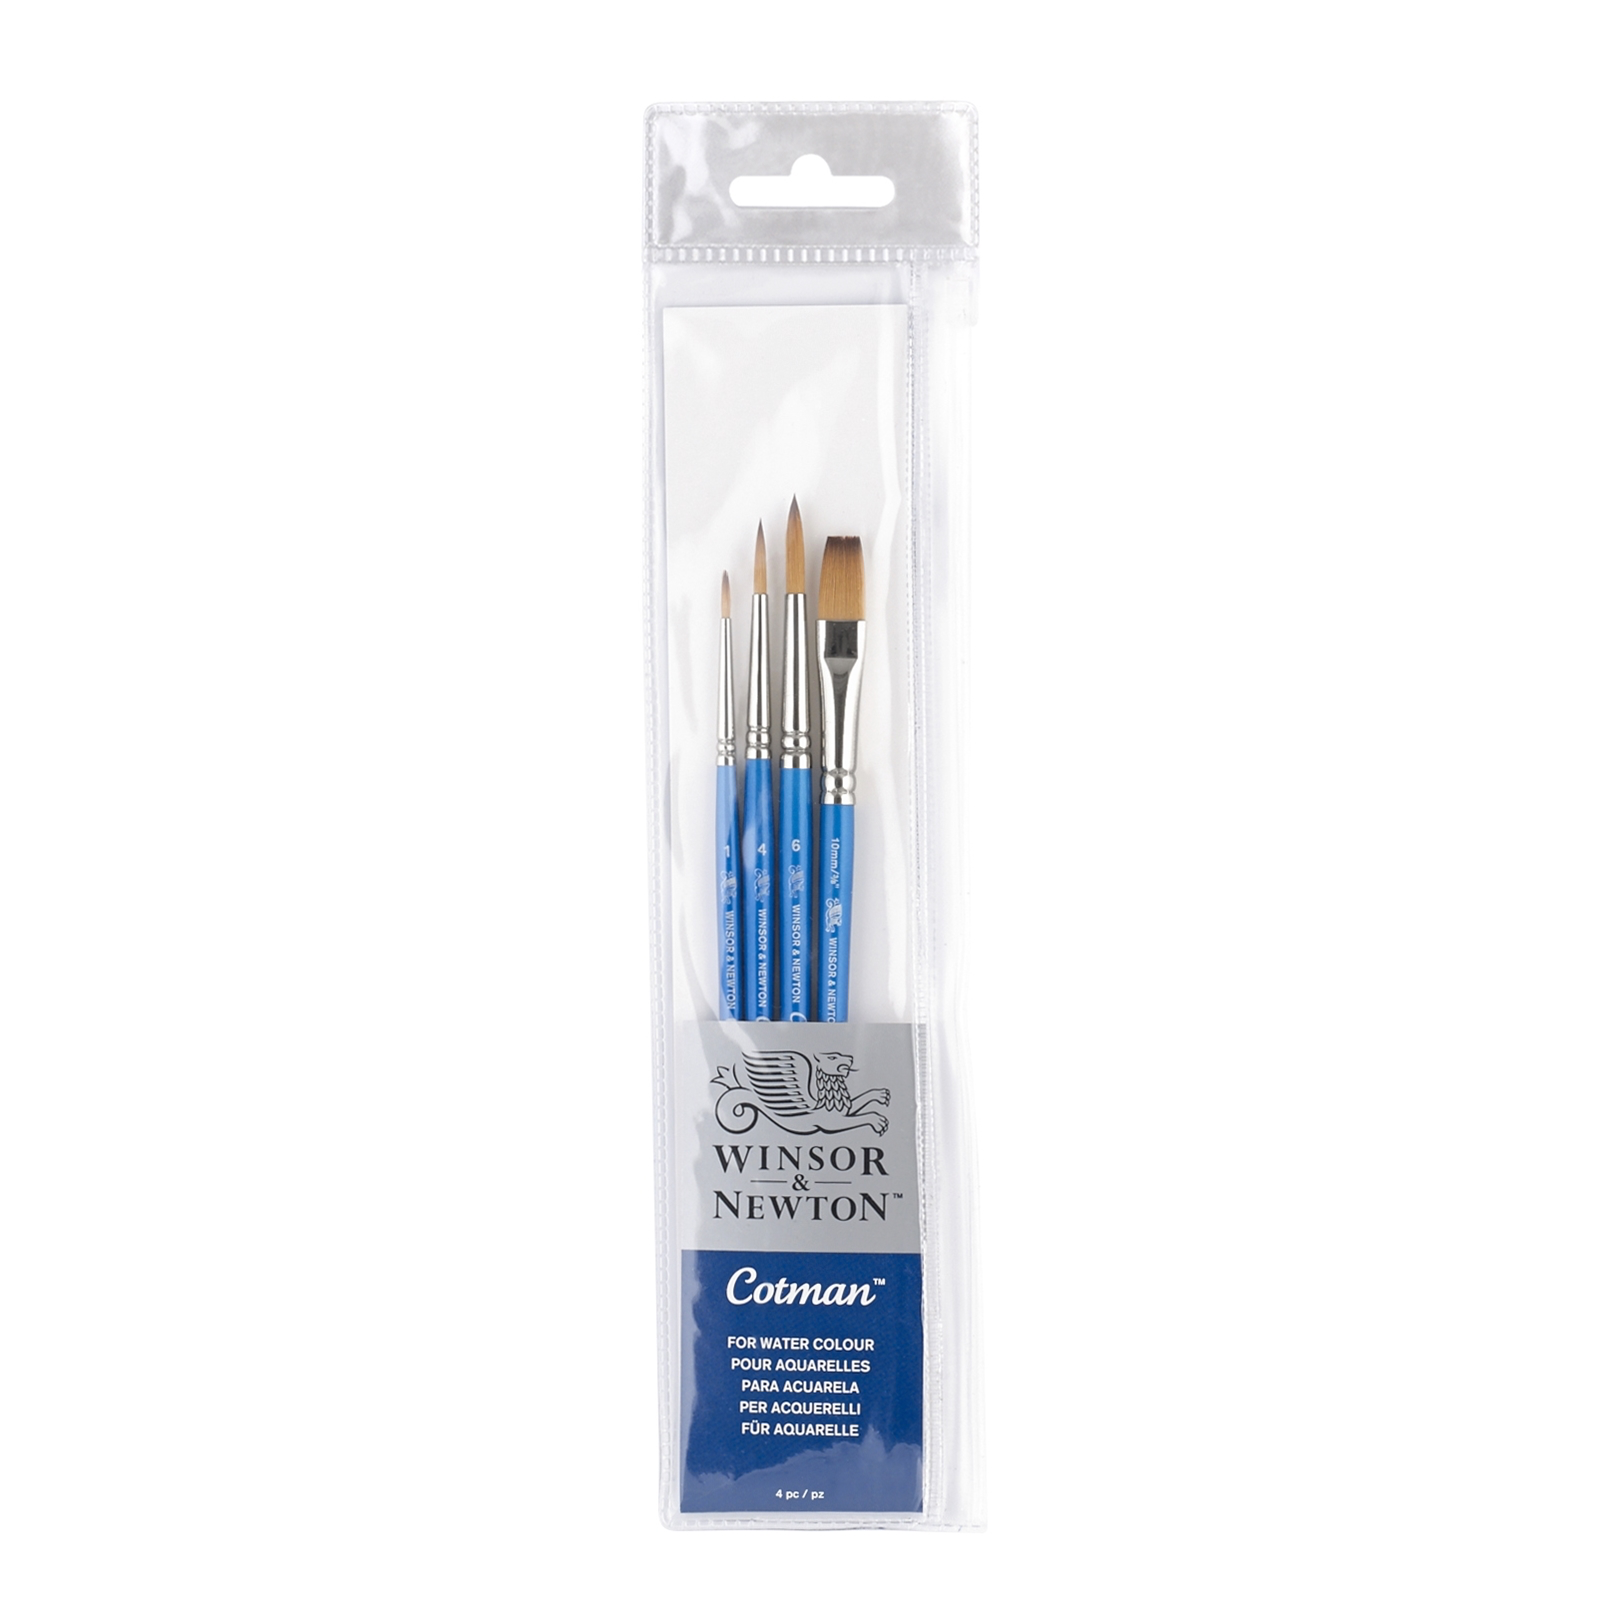 Winsor & Newton Professional Watercolor Synthetic Sable Brush One Stroke 1/4in